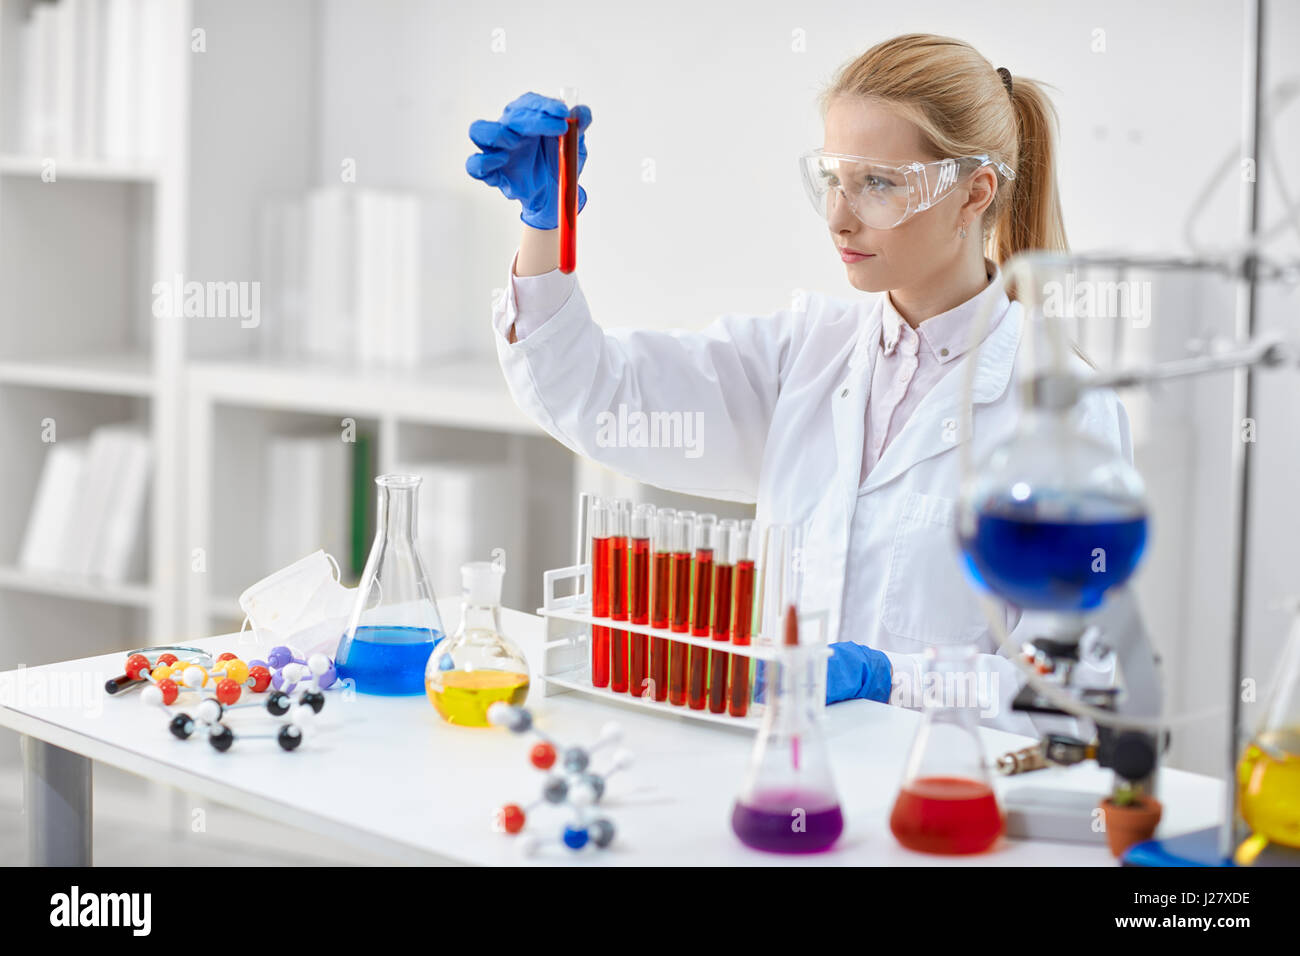 woman in laboratory checking test tubes with red liquid Stock Photo